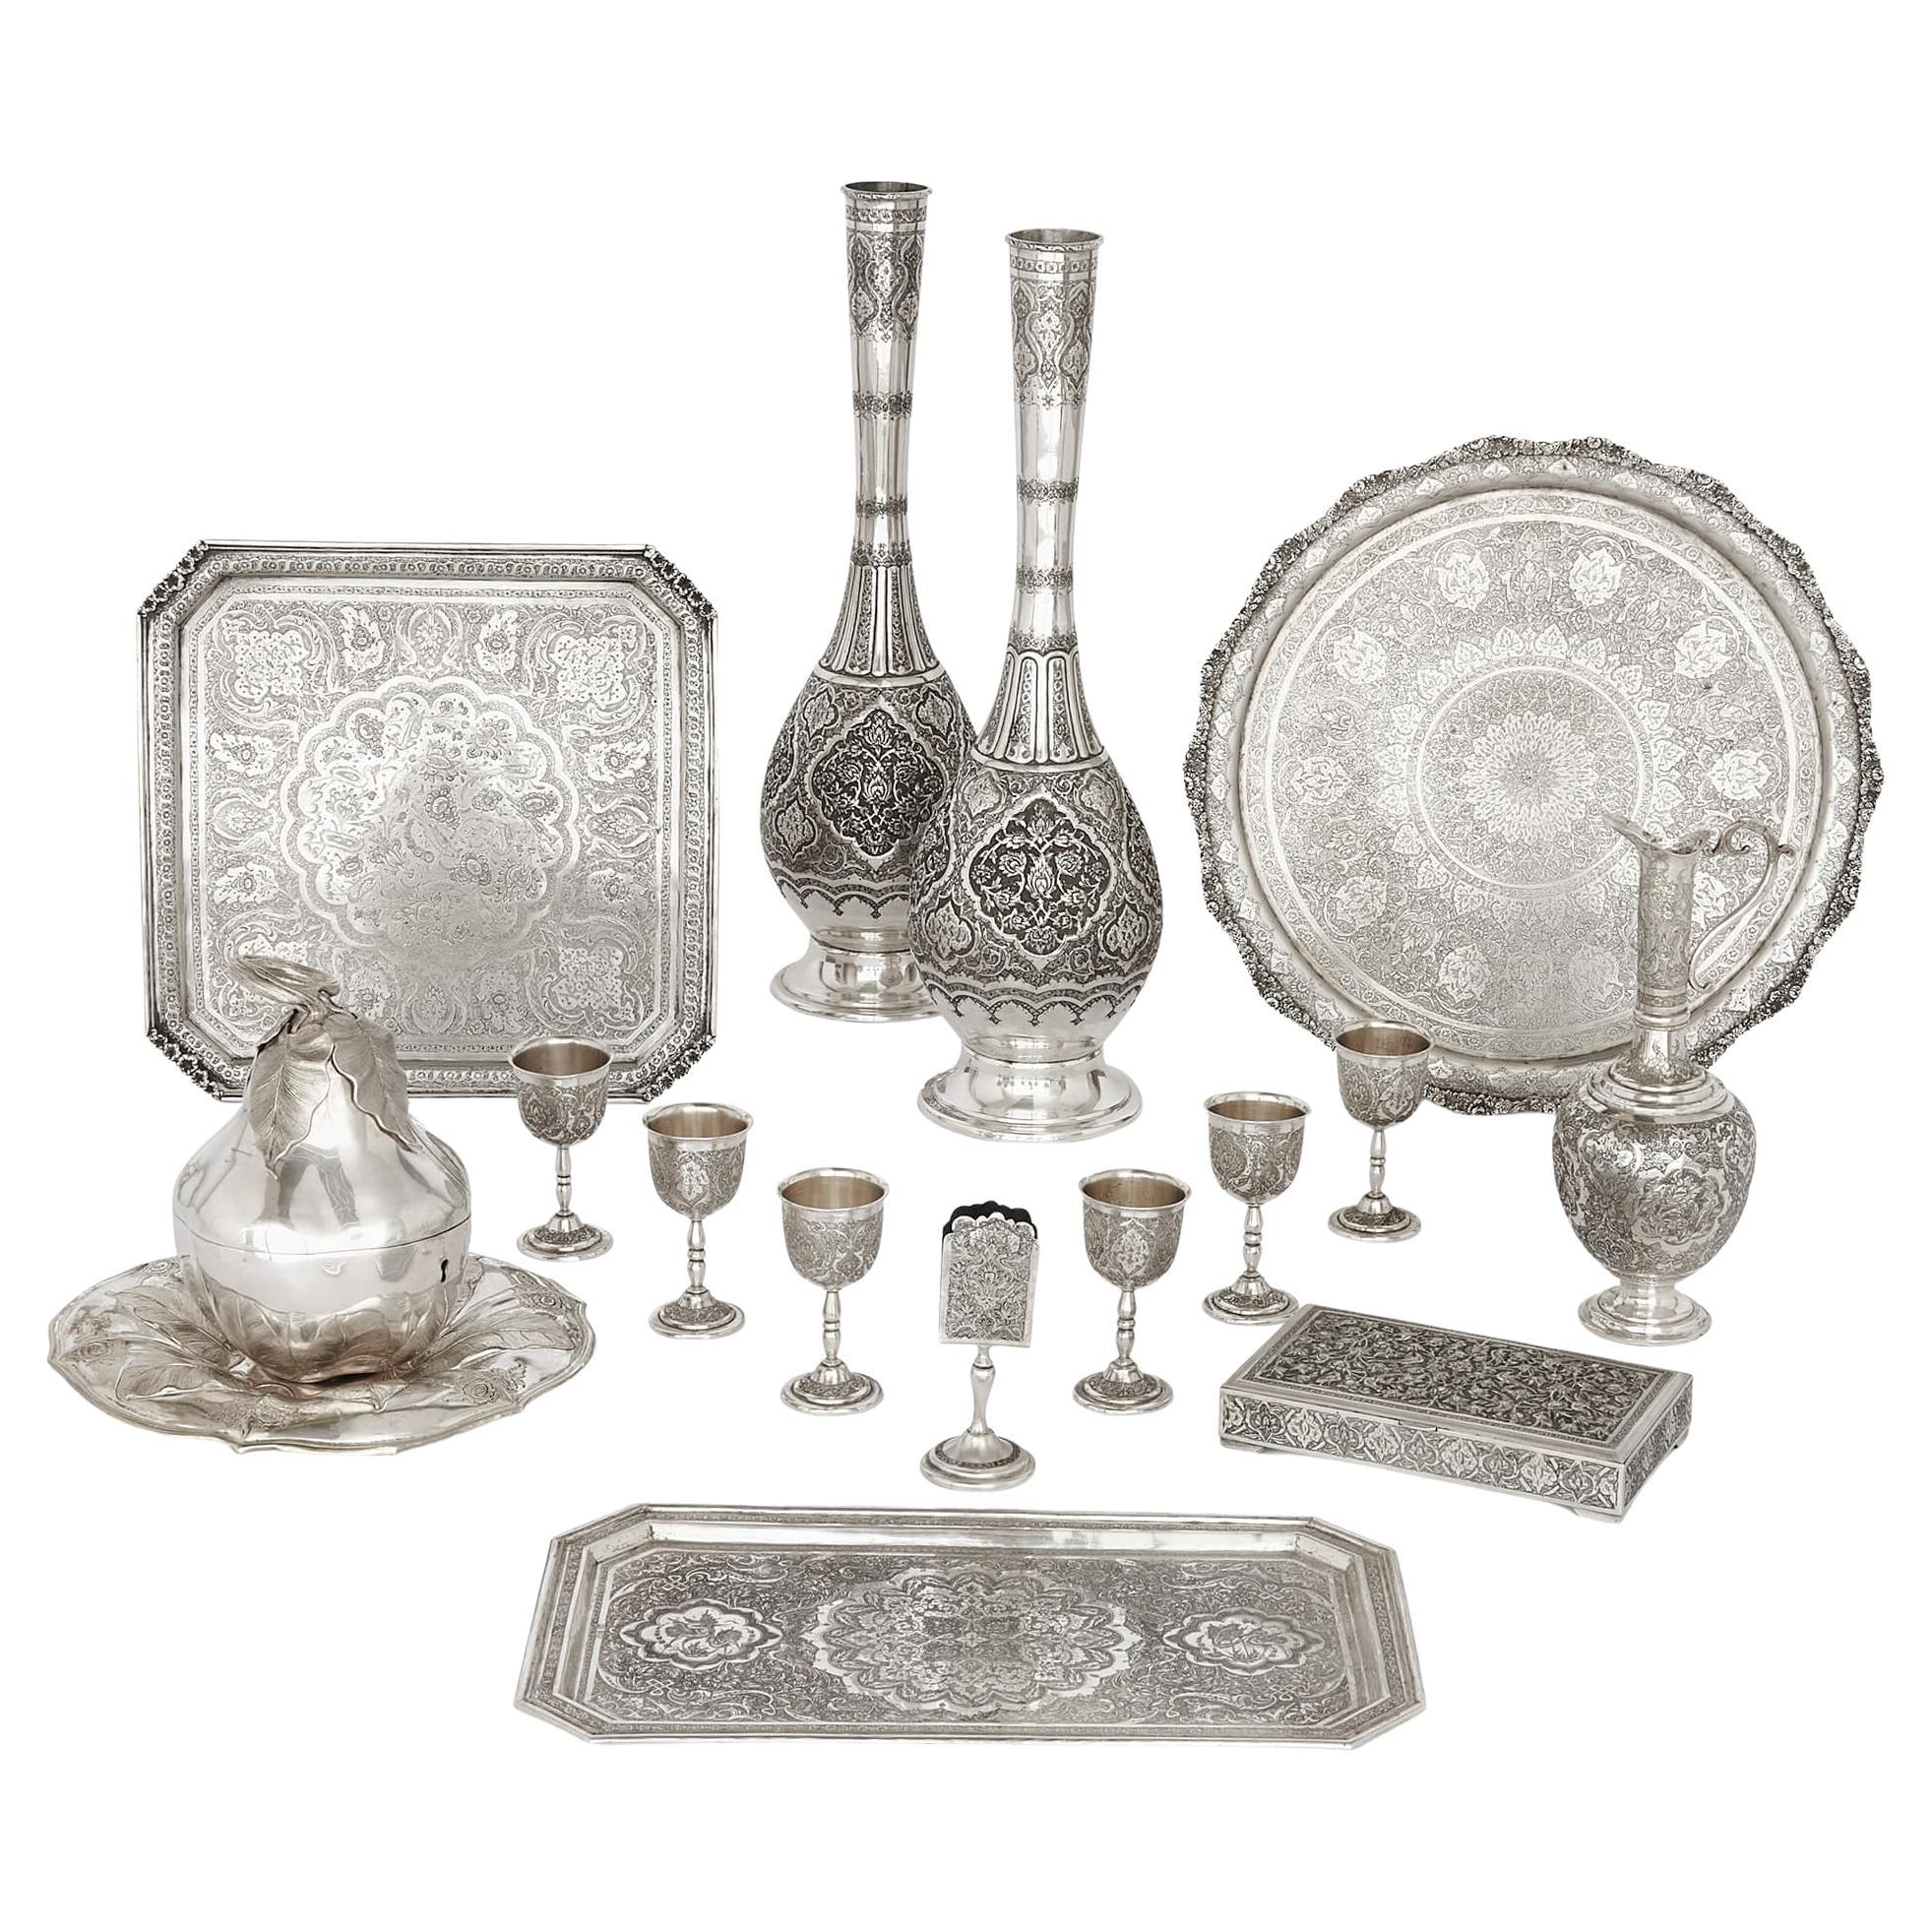 Collection of Persian Silverware and Tableware For Sale